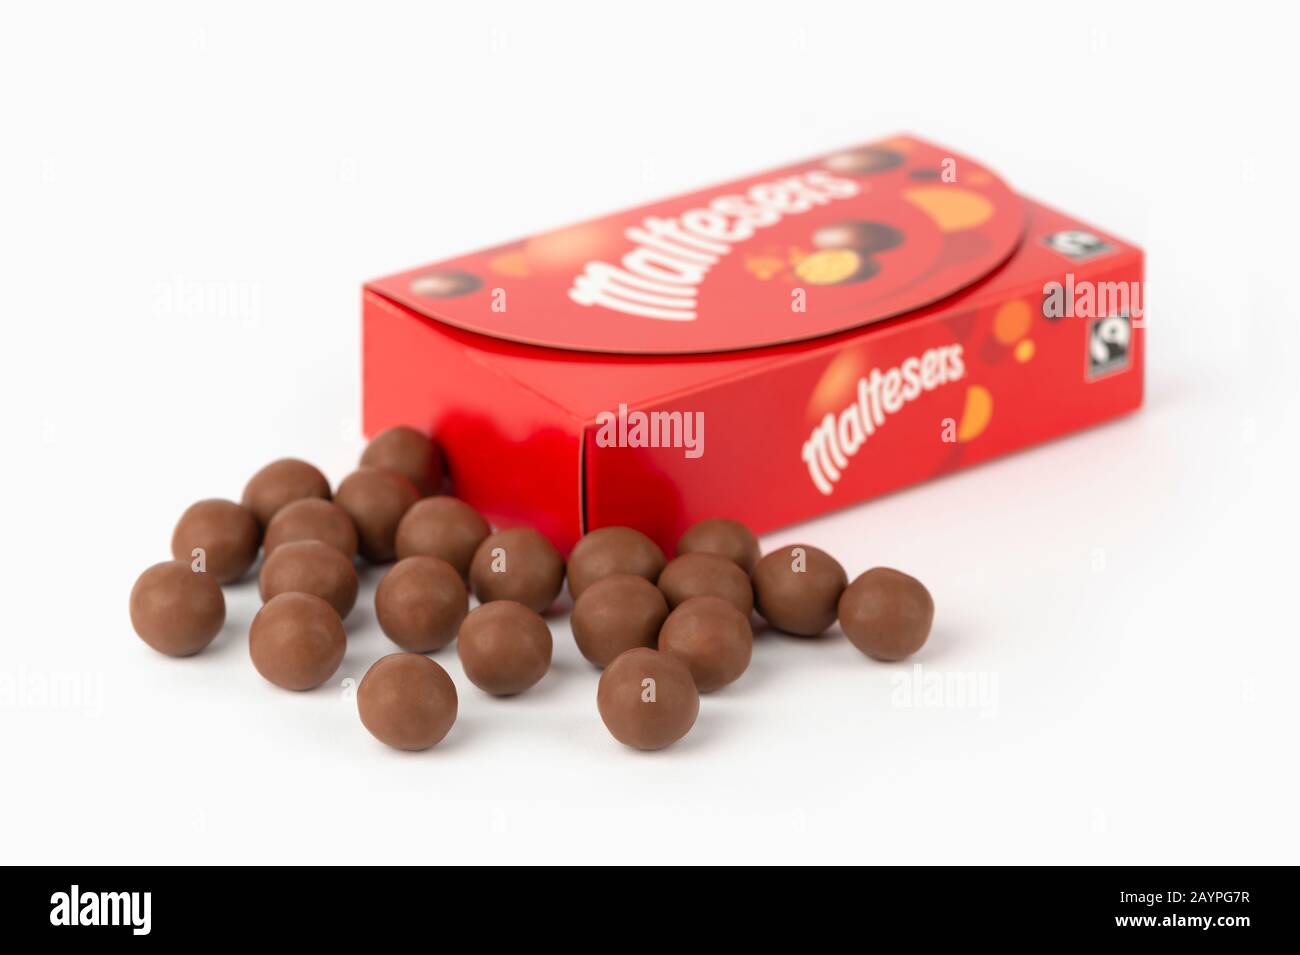 Some Maltesers chocolates shot on a white background along with the product's box packaging. Stock Photo